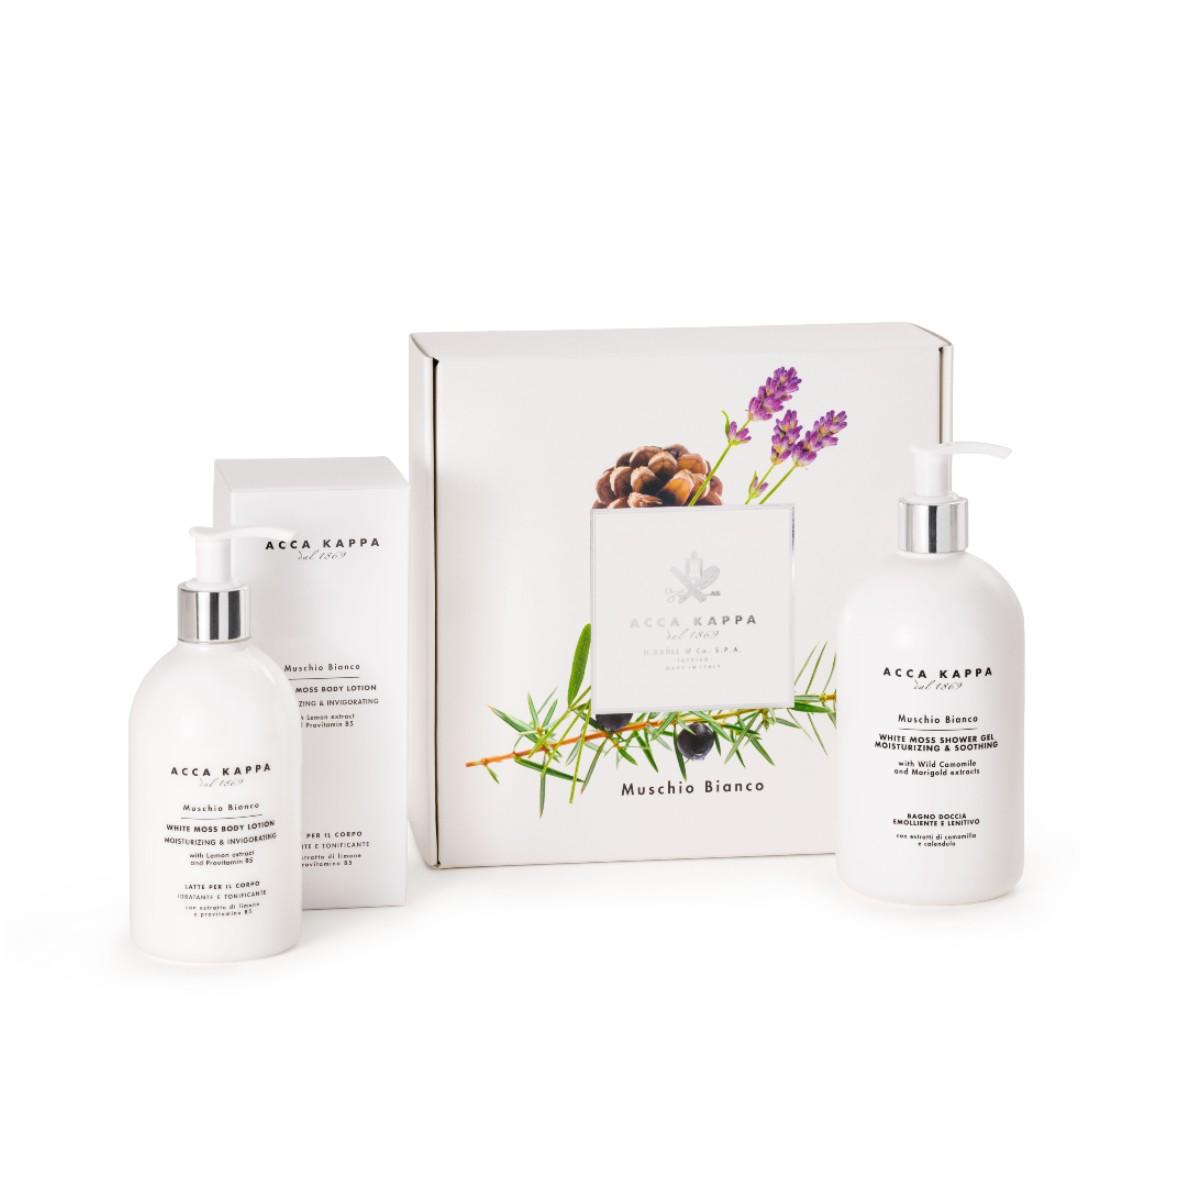 ACCA KAPPA White Moss Gift Set of Shower Gel (500ml) and Body Lotion (300ml)